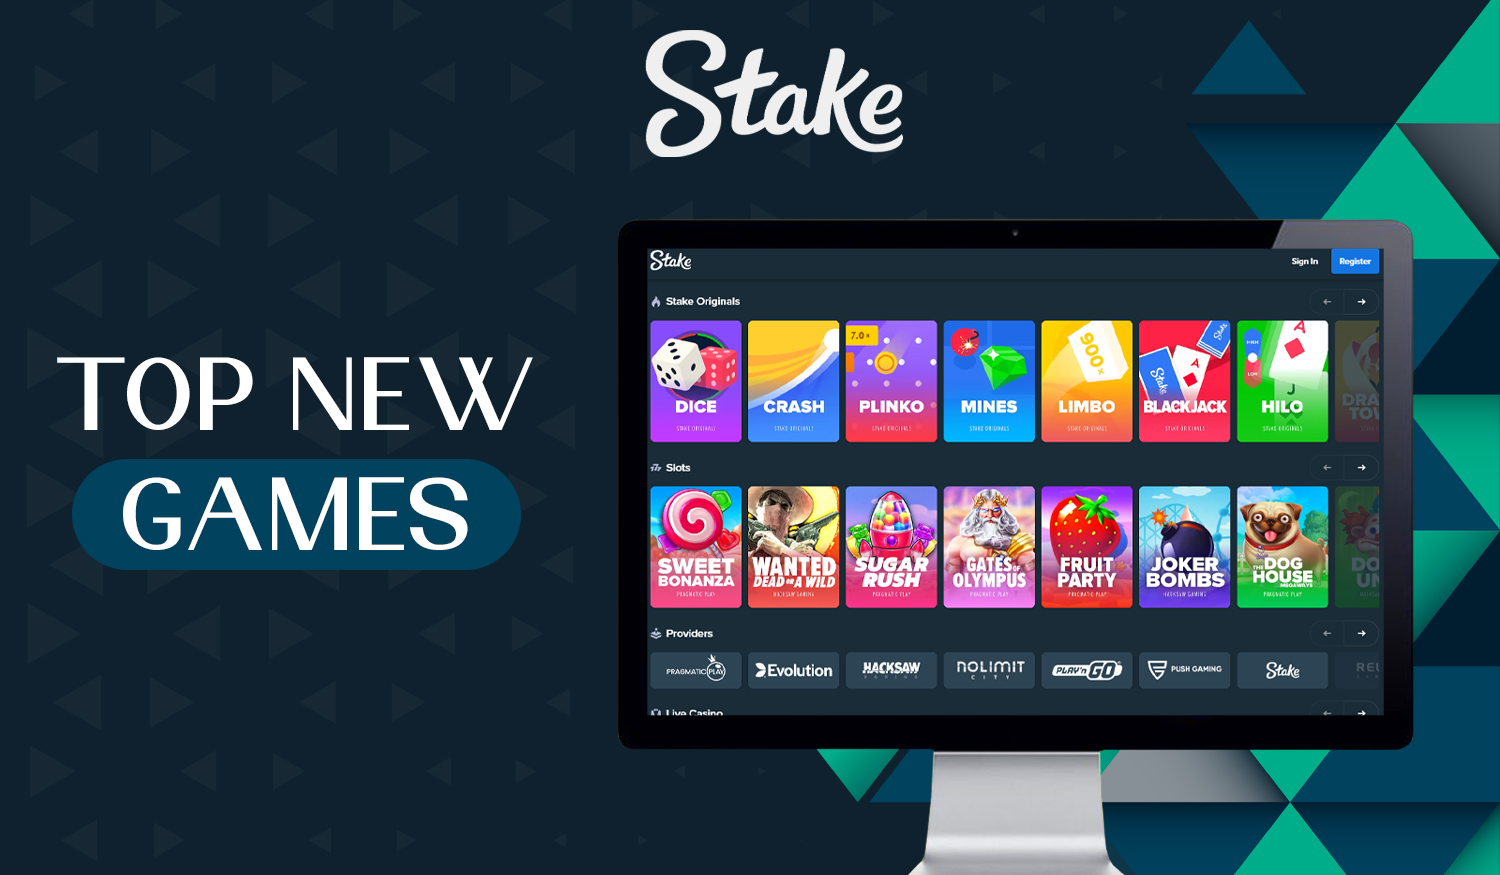 The best new games in online casino gaming section is available on Stake 